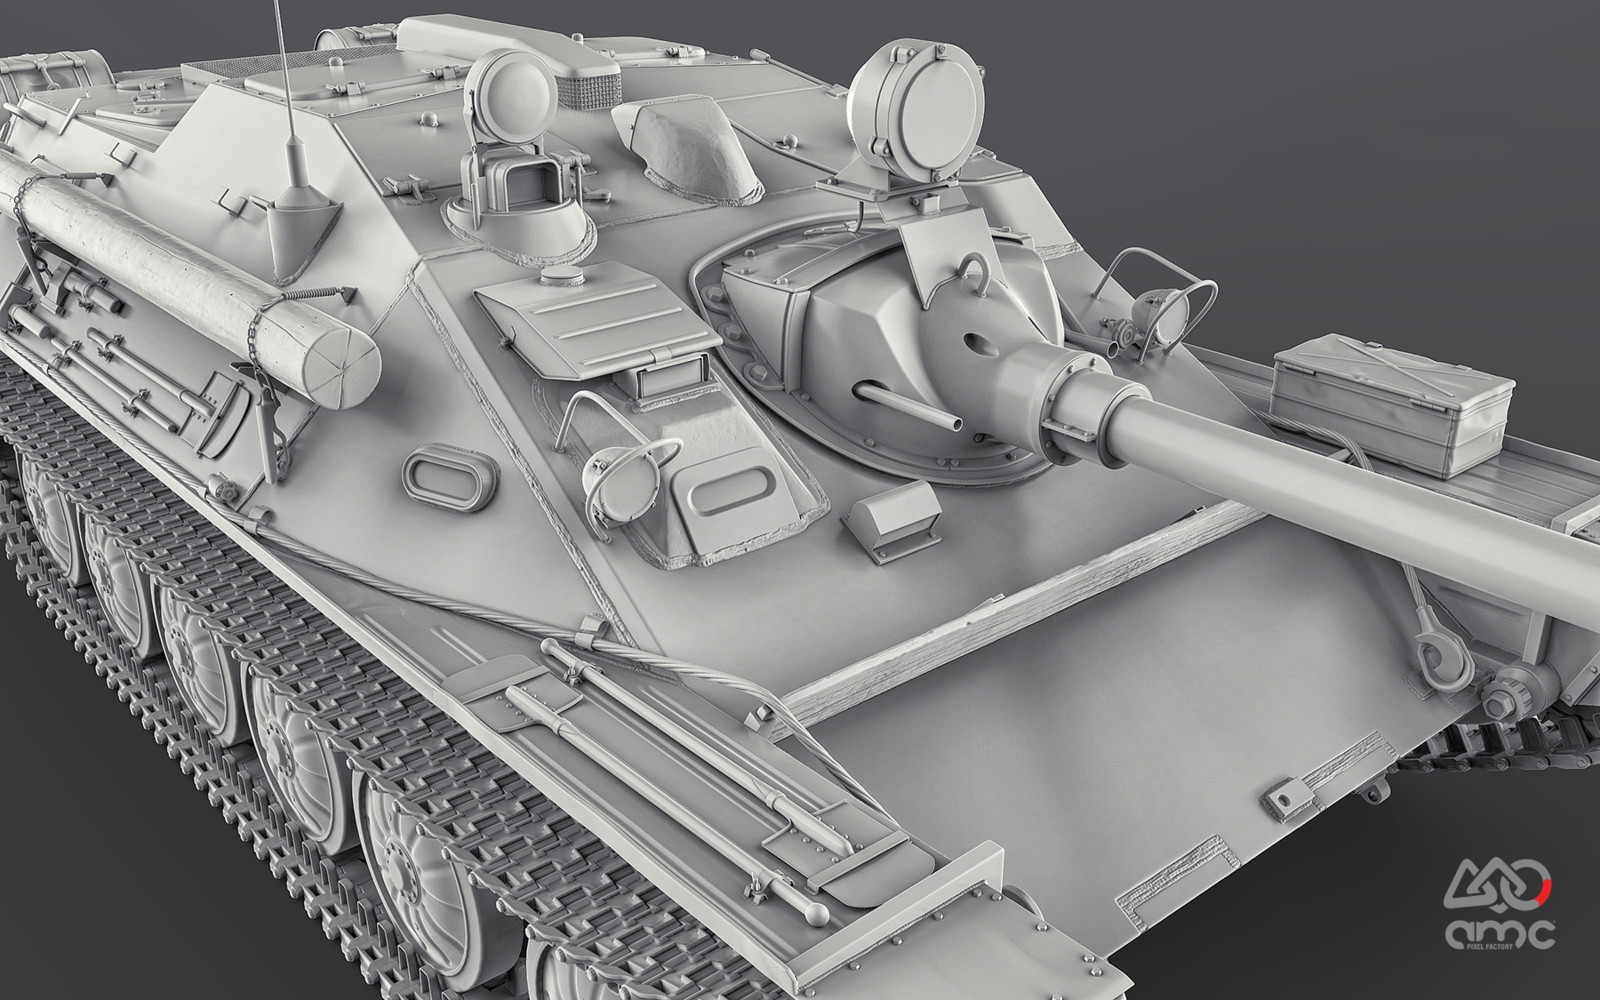 Here's a model i made a while back of a soviet ASU-85 air-landing